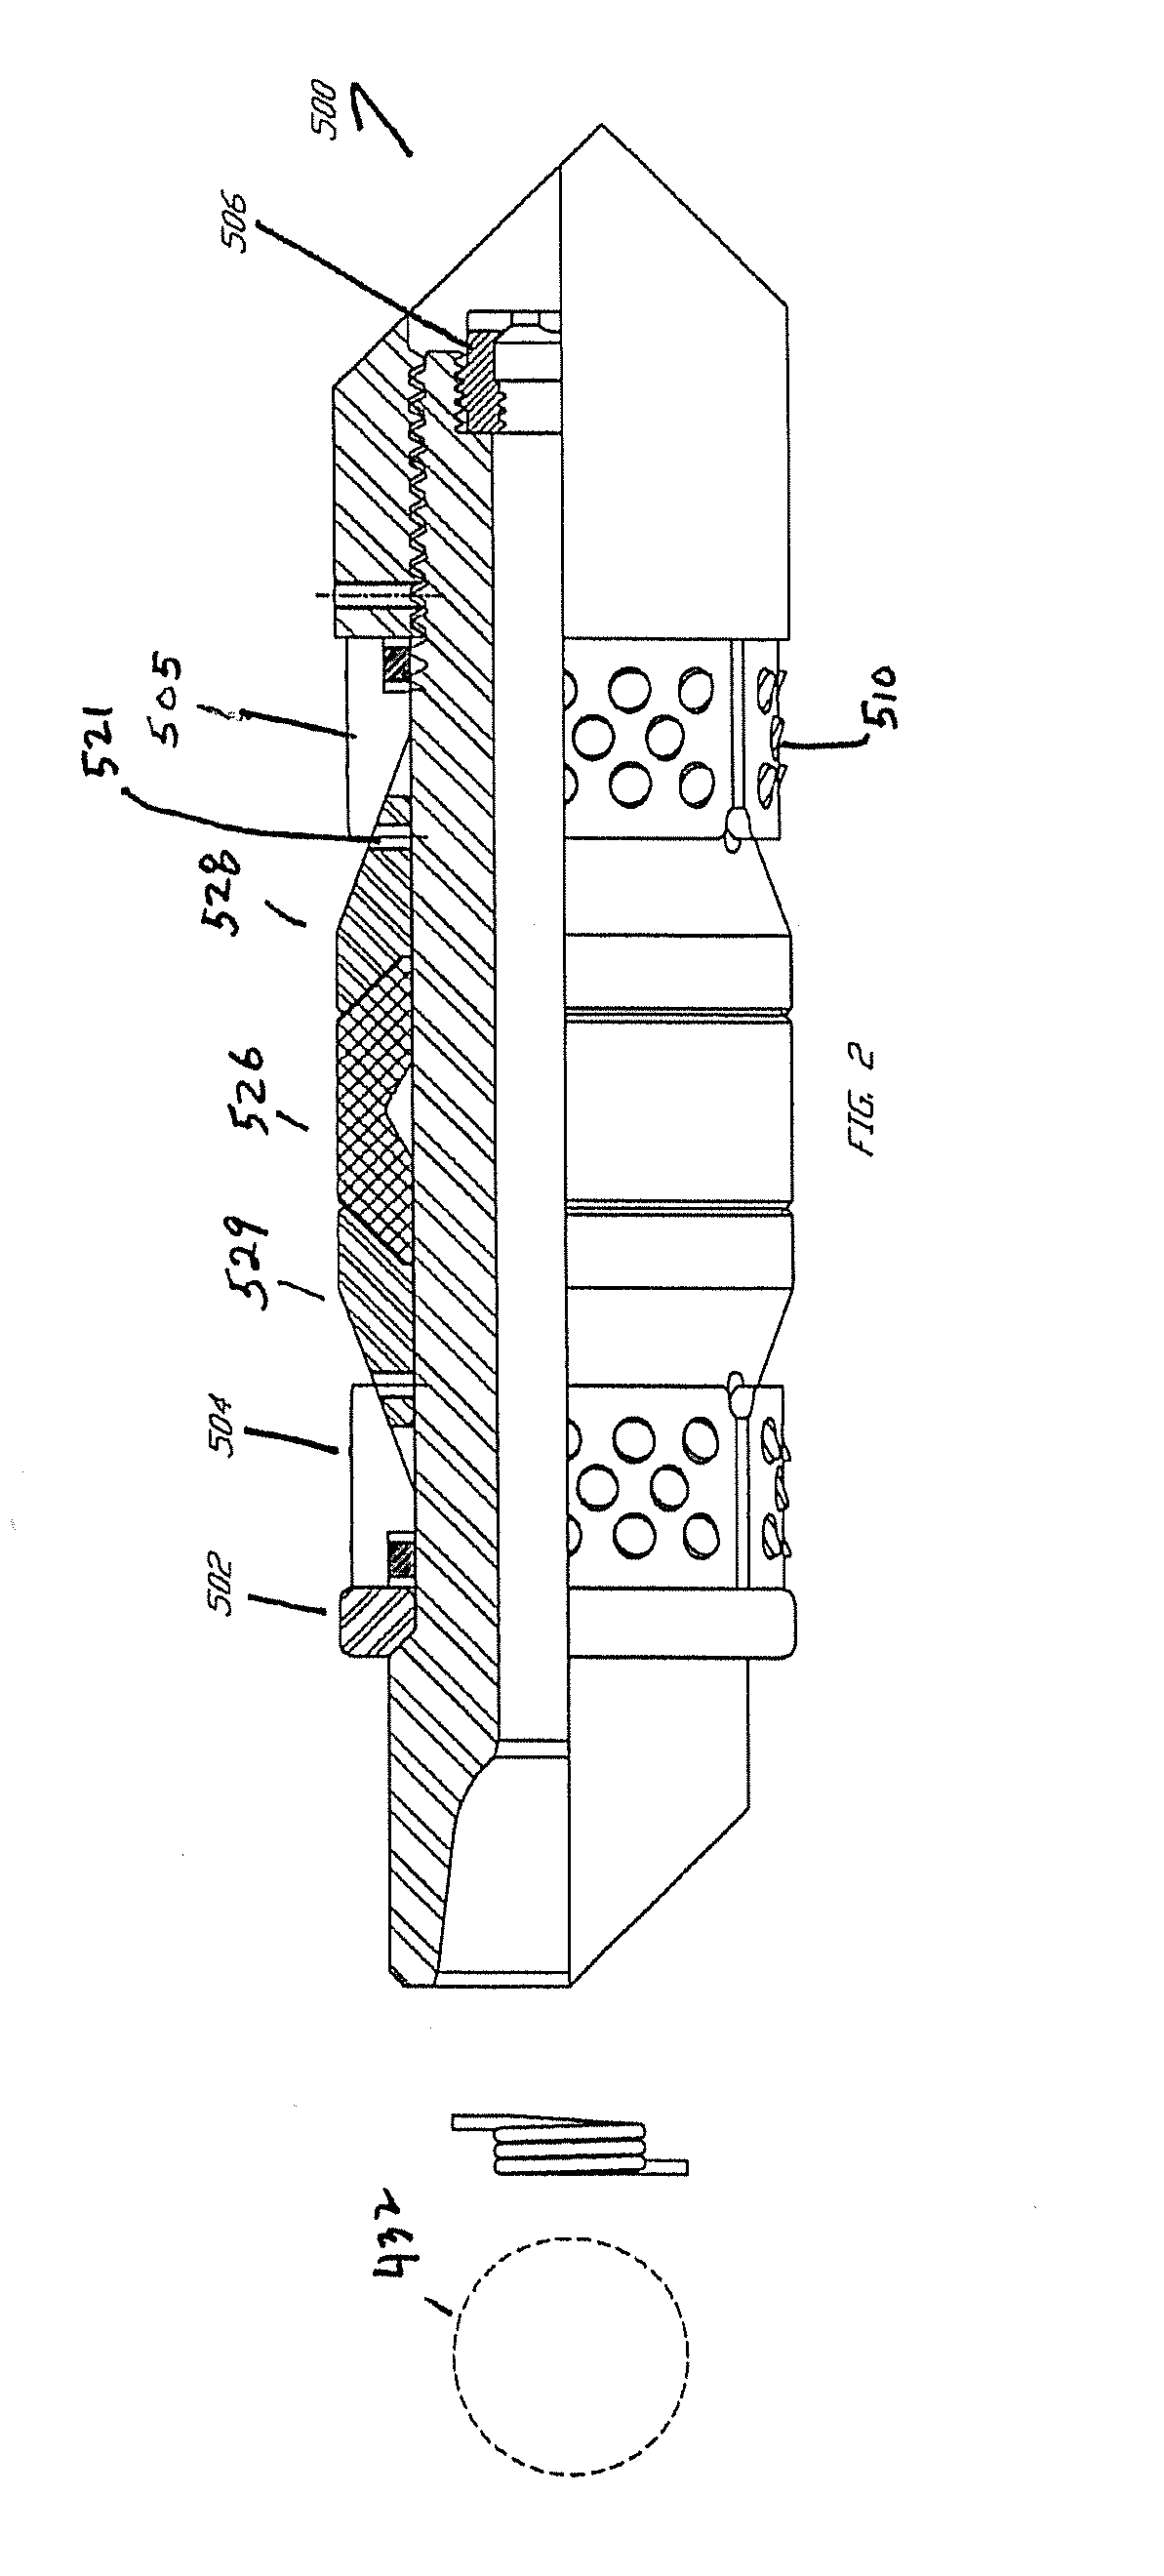 Dissolvable downhole tools comprising both degradable polymer acid and degradable metal alloy elements